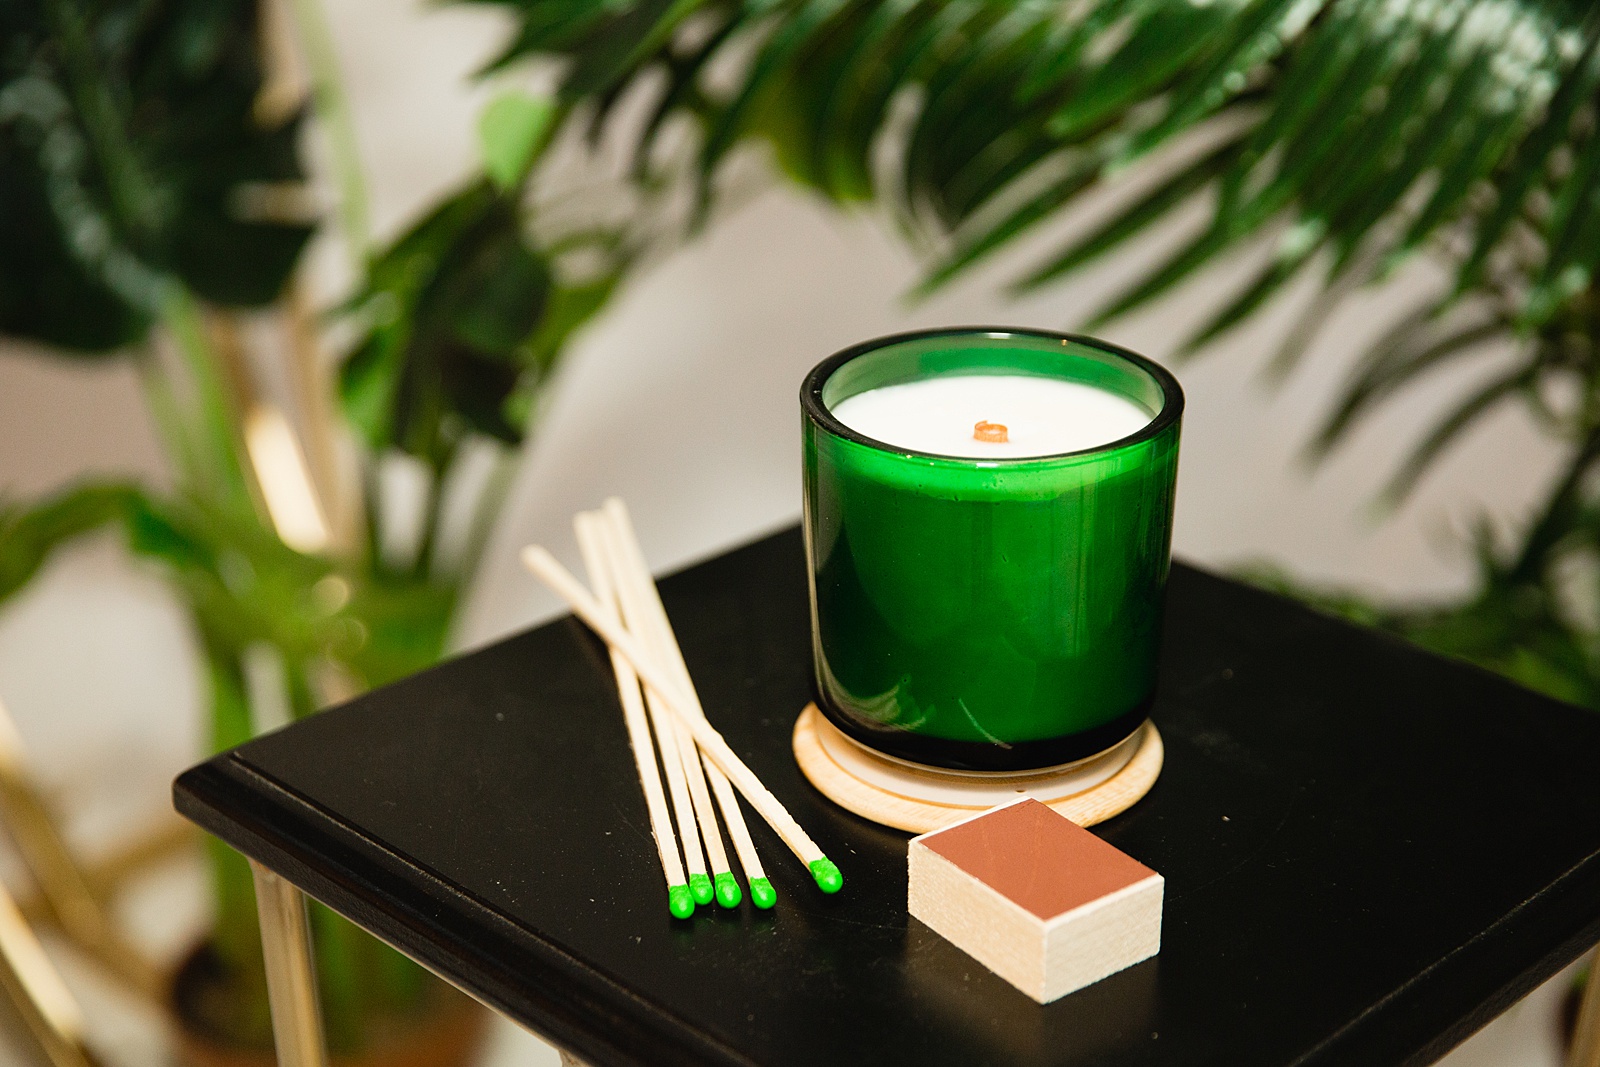 Unique candle and match sticks for a unity candle ceremony by PMA Photography.